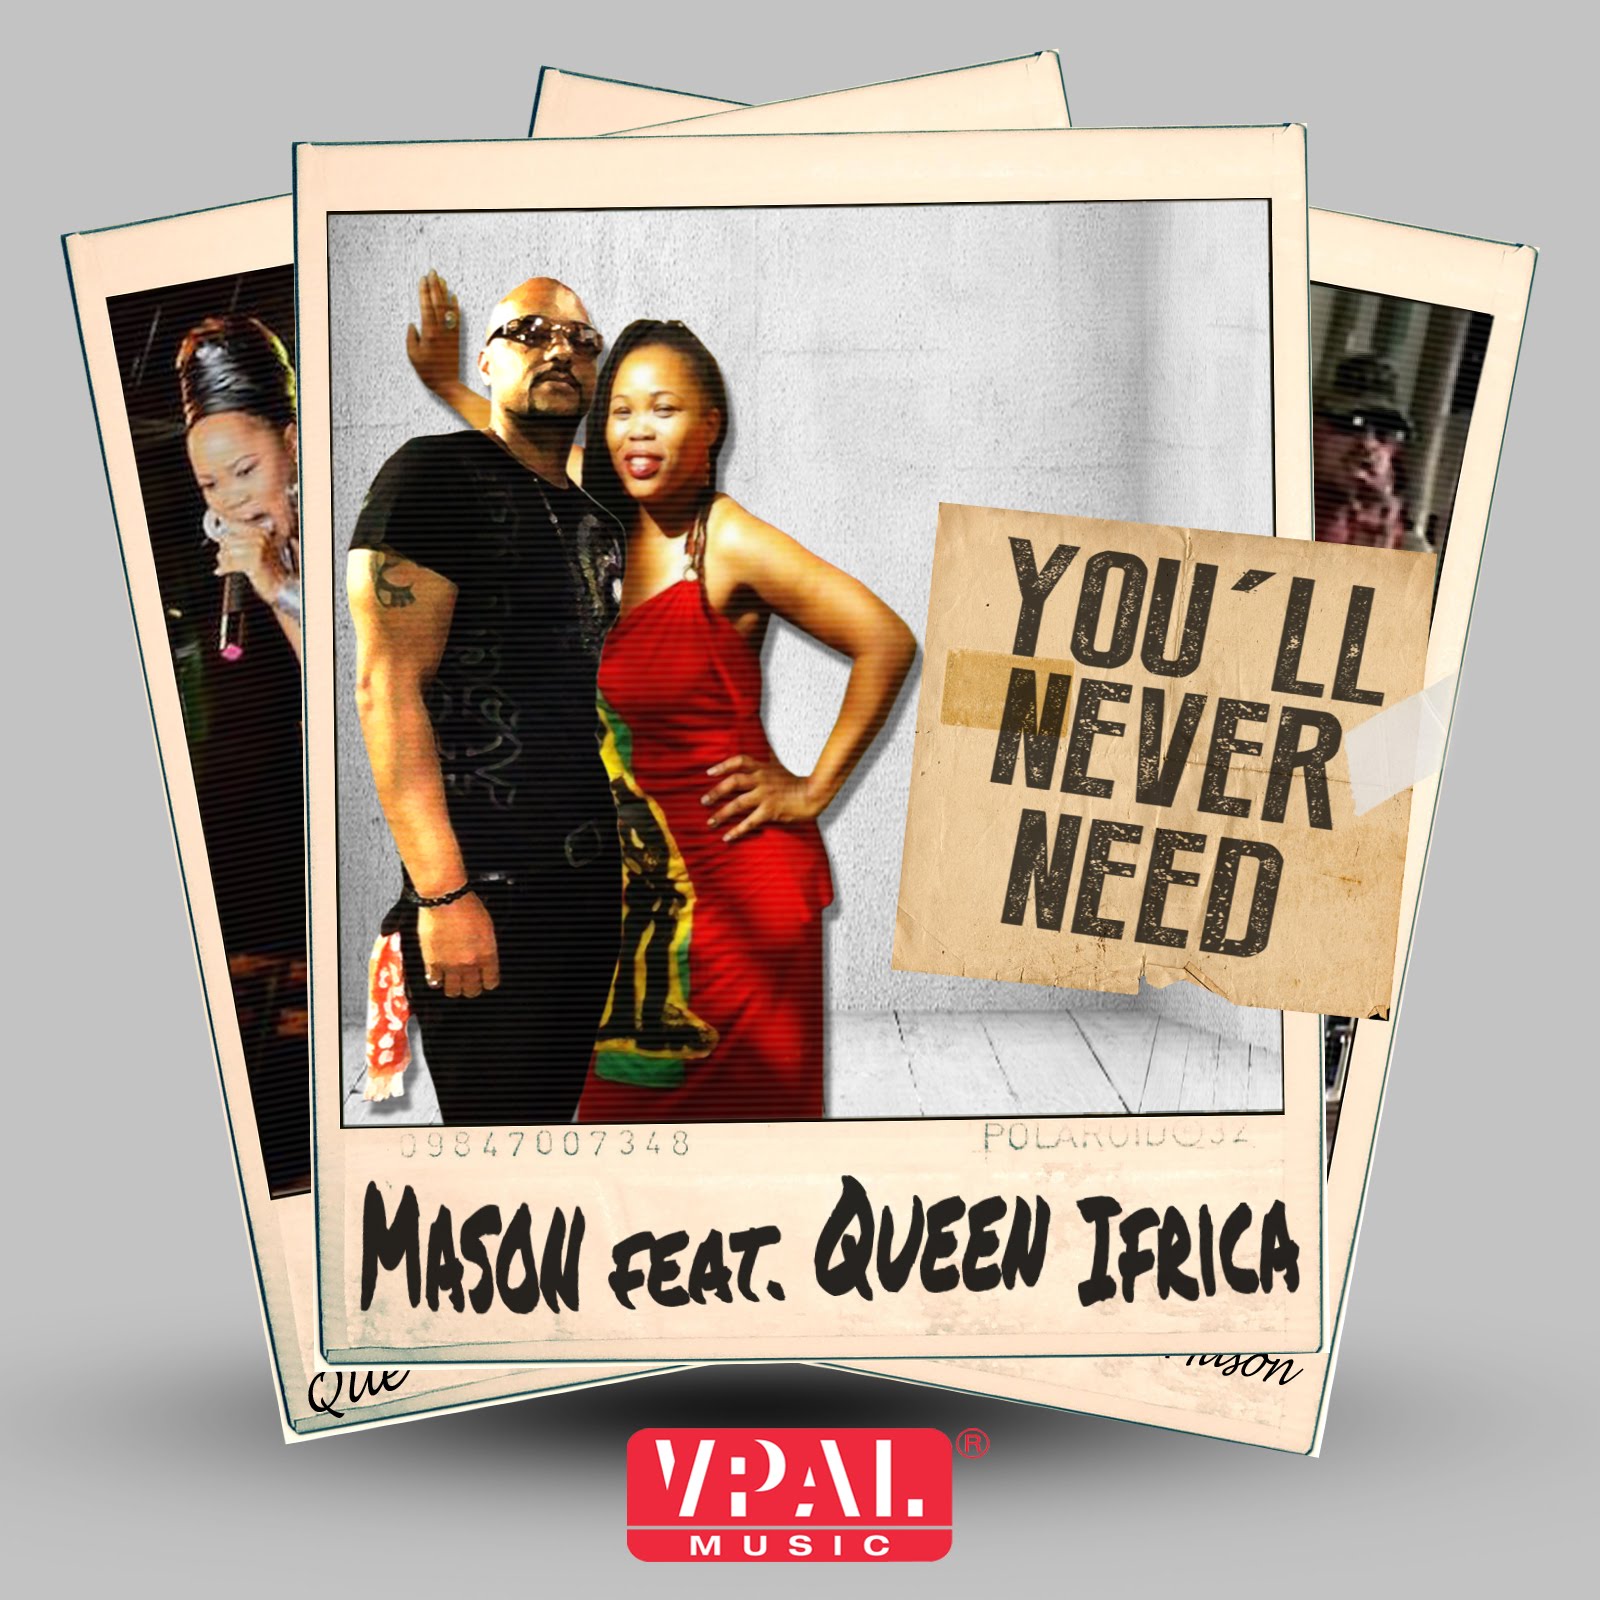 Mason feat. Queen Ifrica - You'll Never Need (Lyric Video) [11/7/2015]